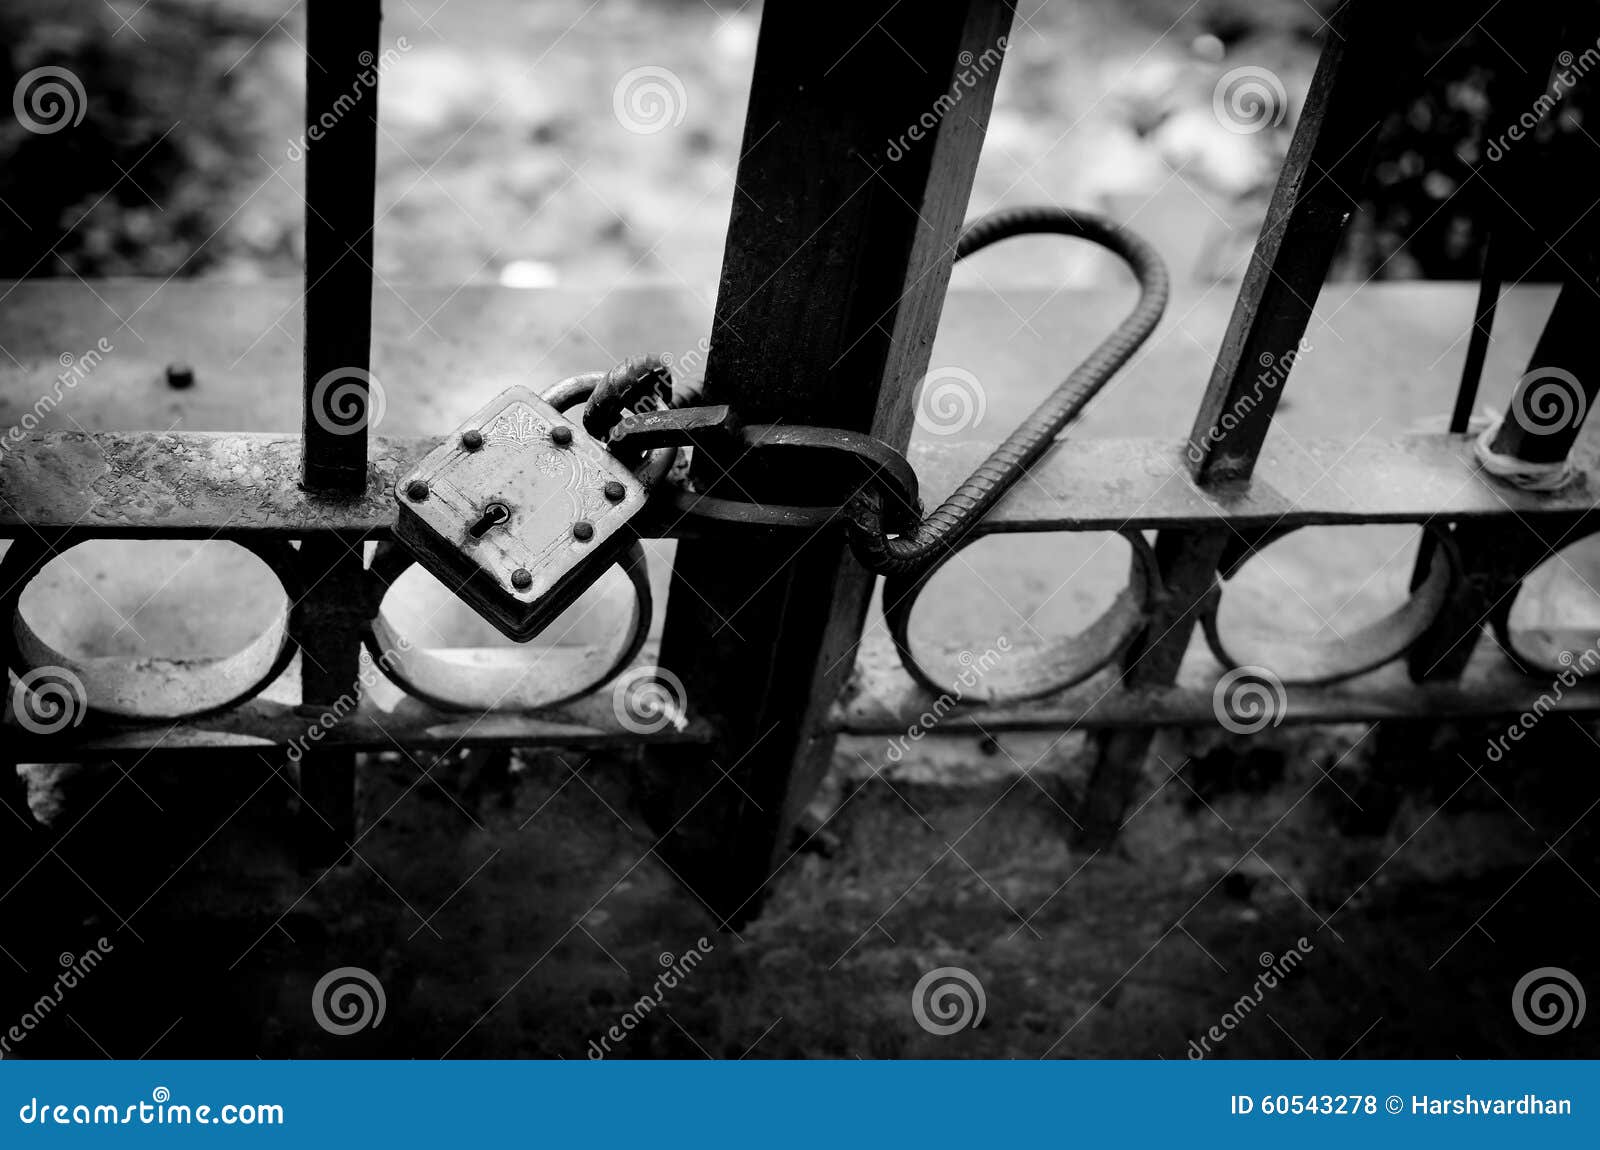 The lock on the grills stock photo. Image of texture - 60543278